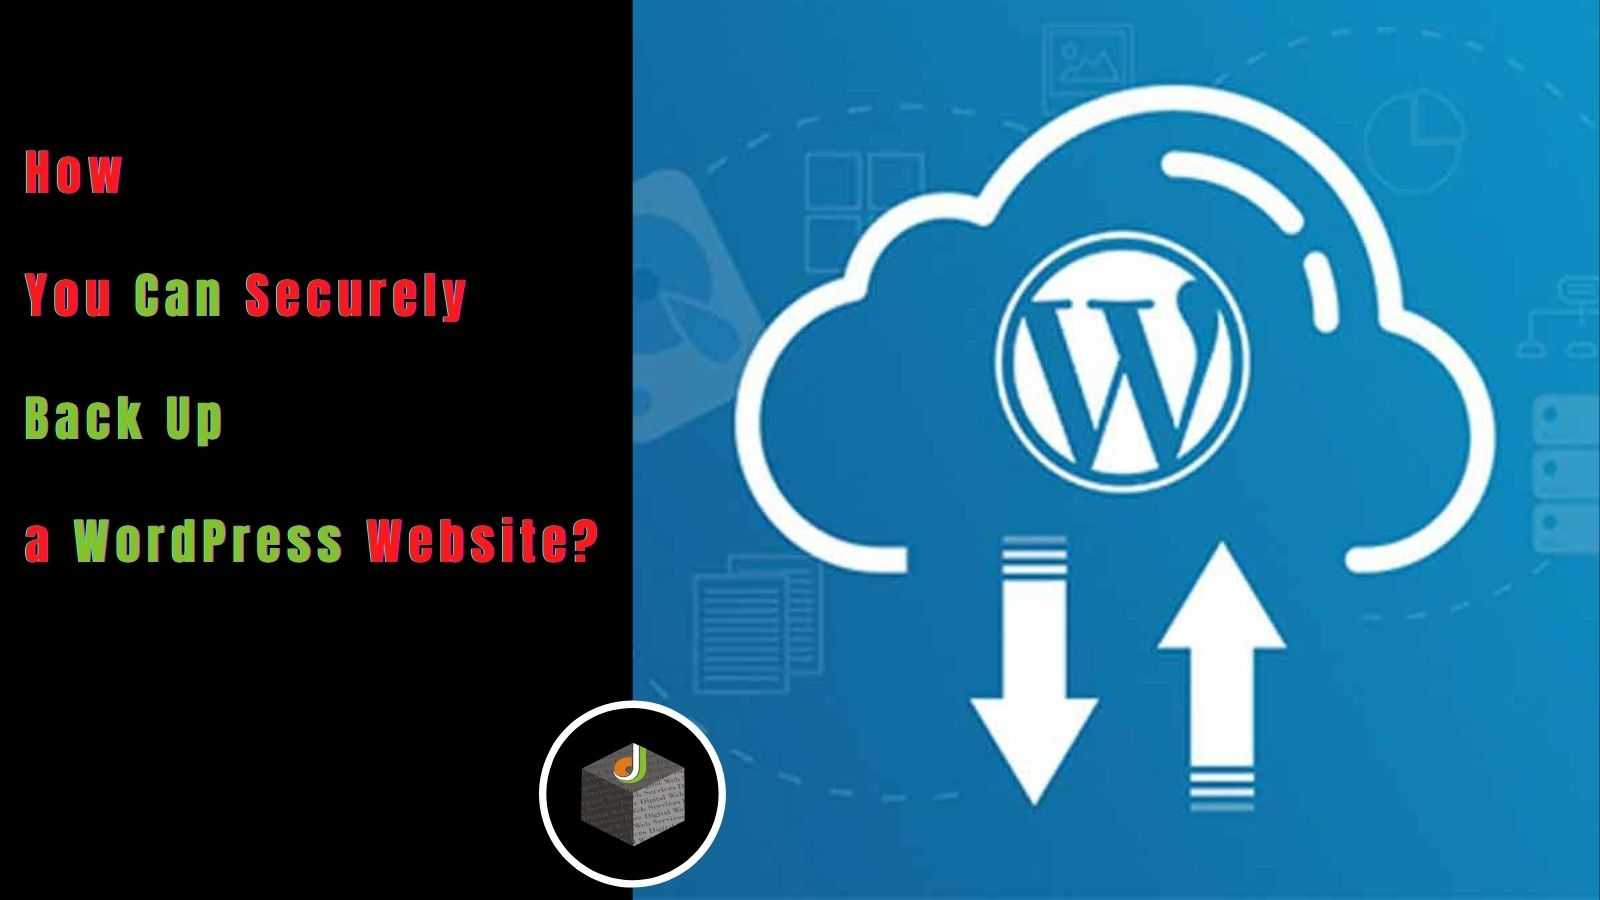 How You Can Securely Back Up a WordPress Website?